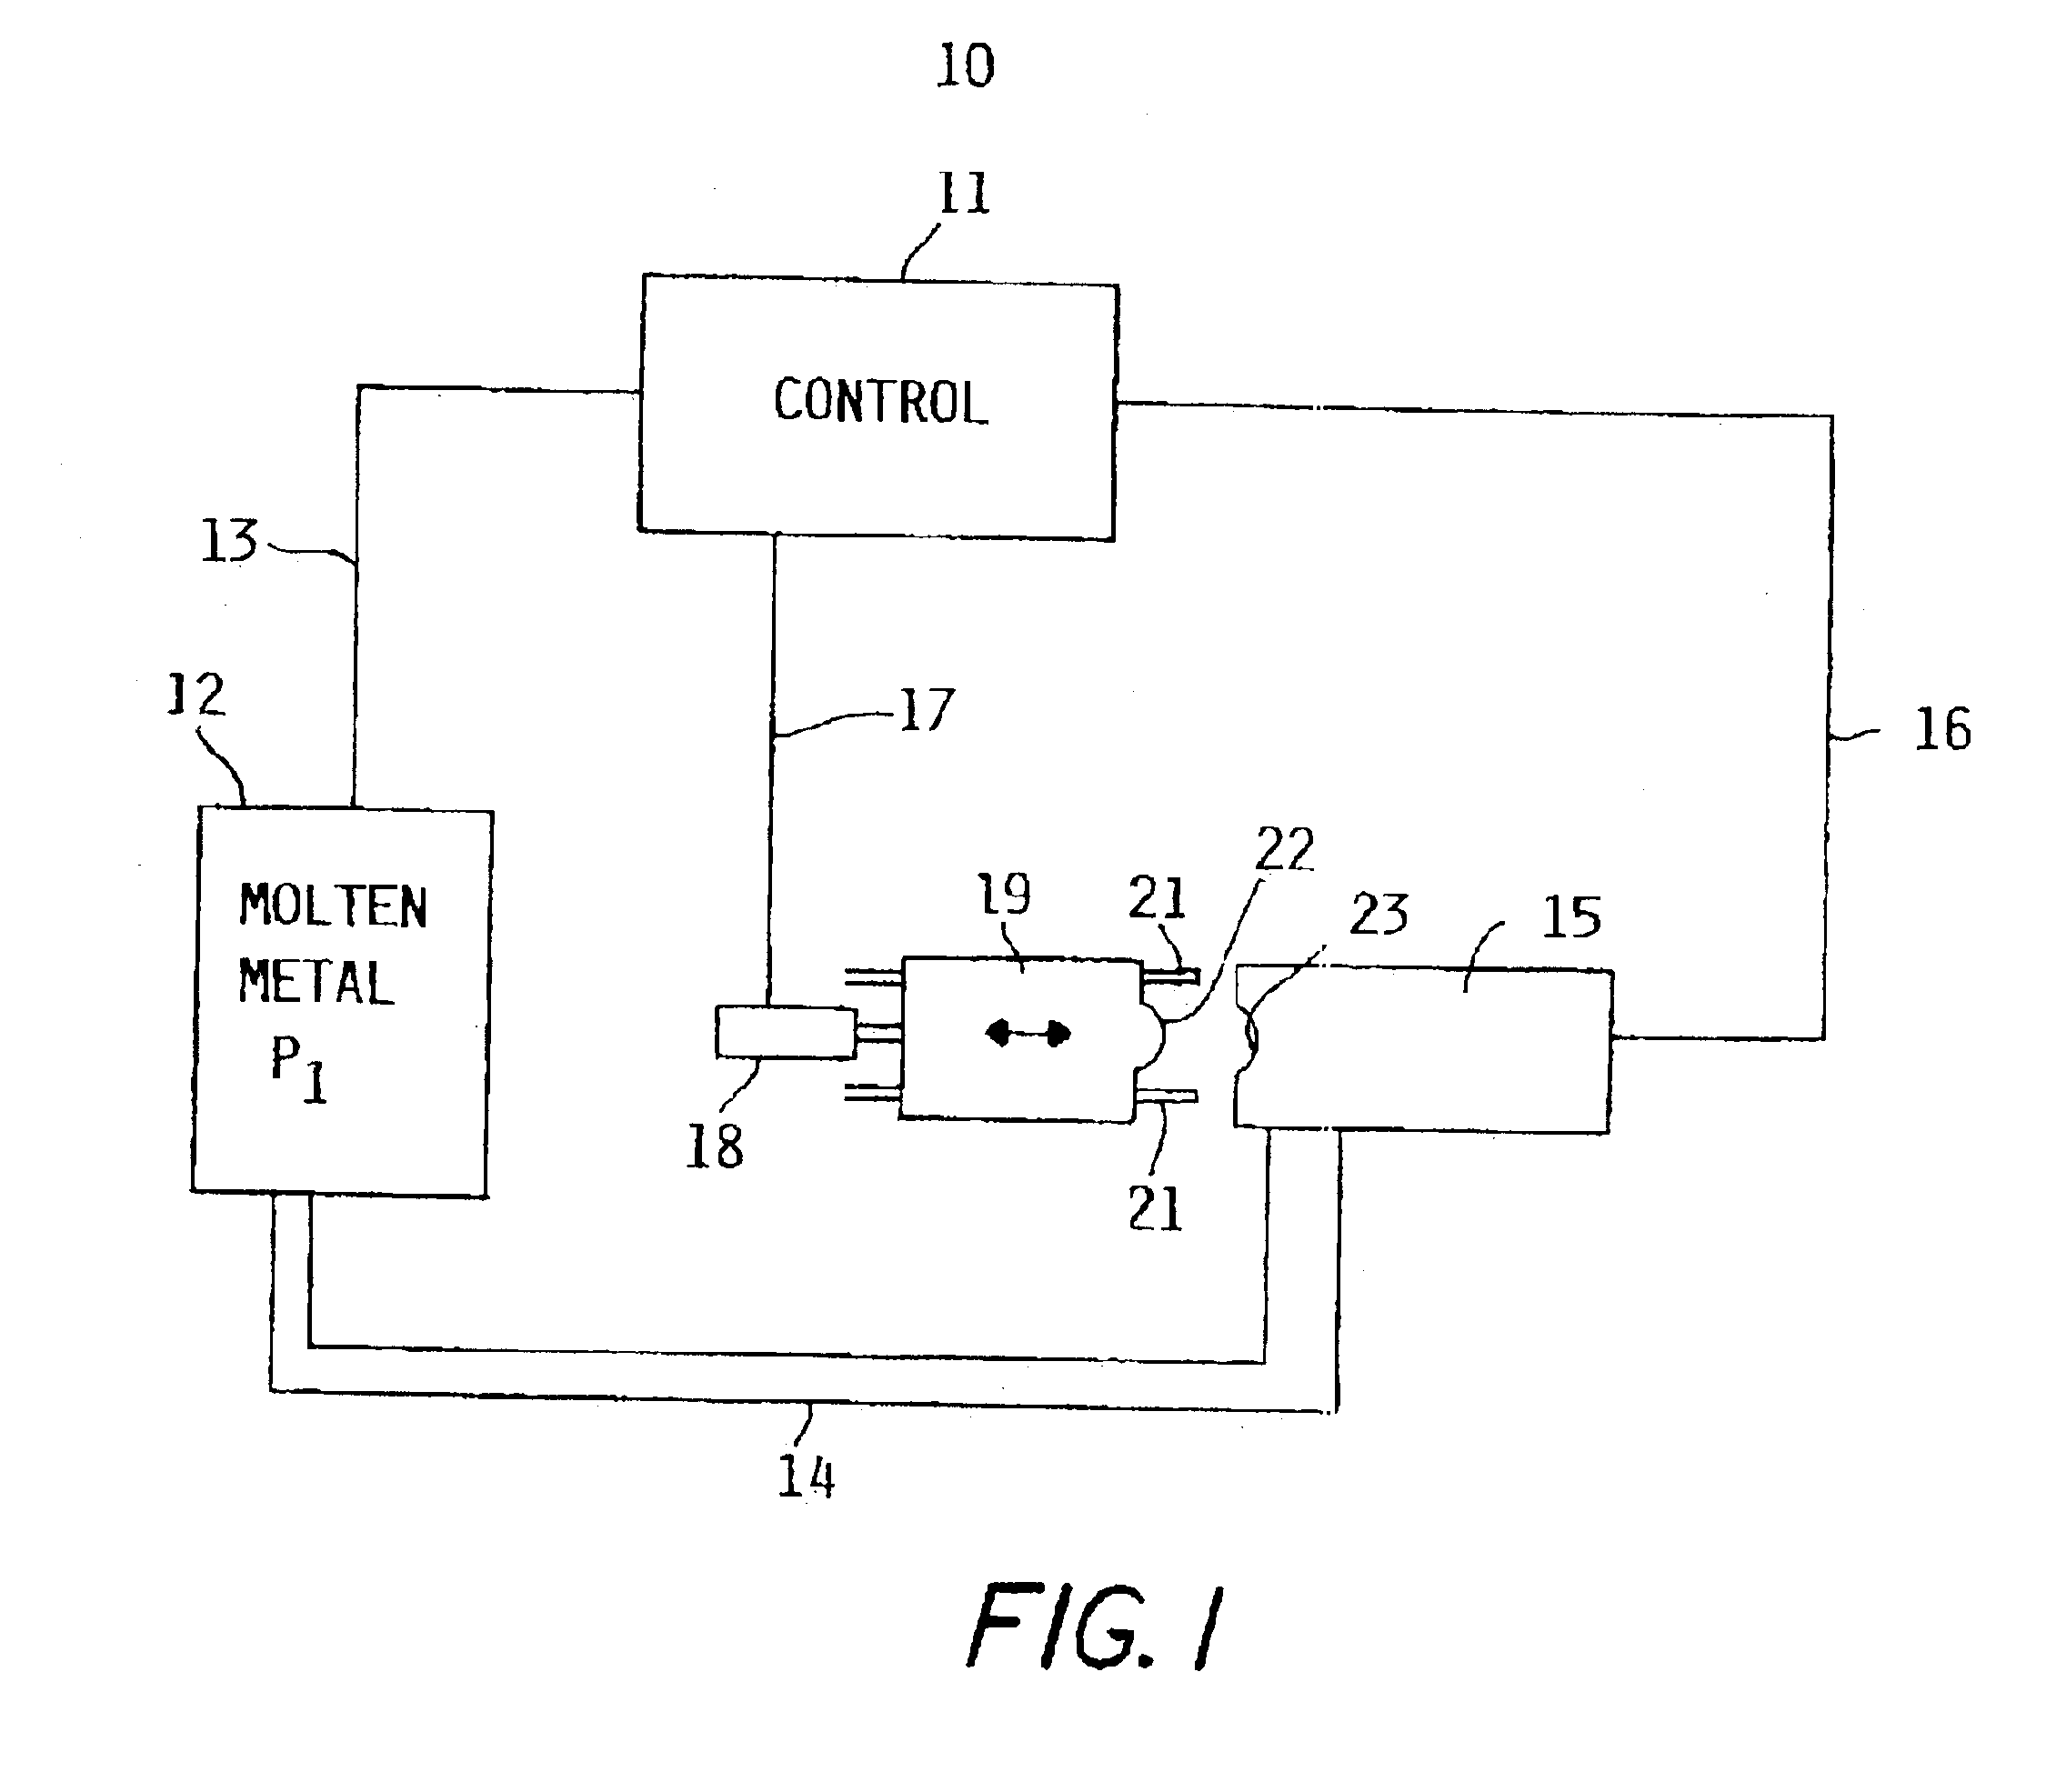 Apparatus and method of forming parts